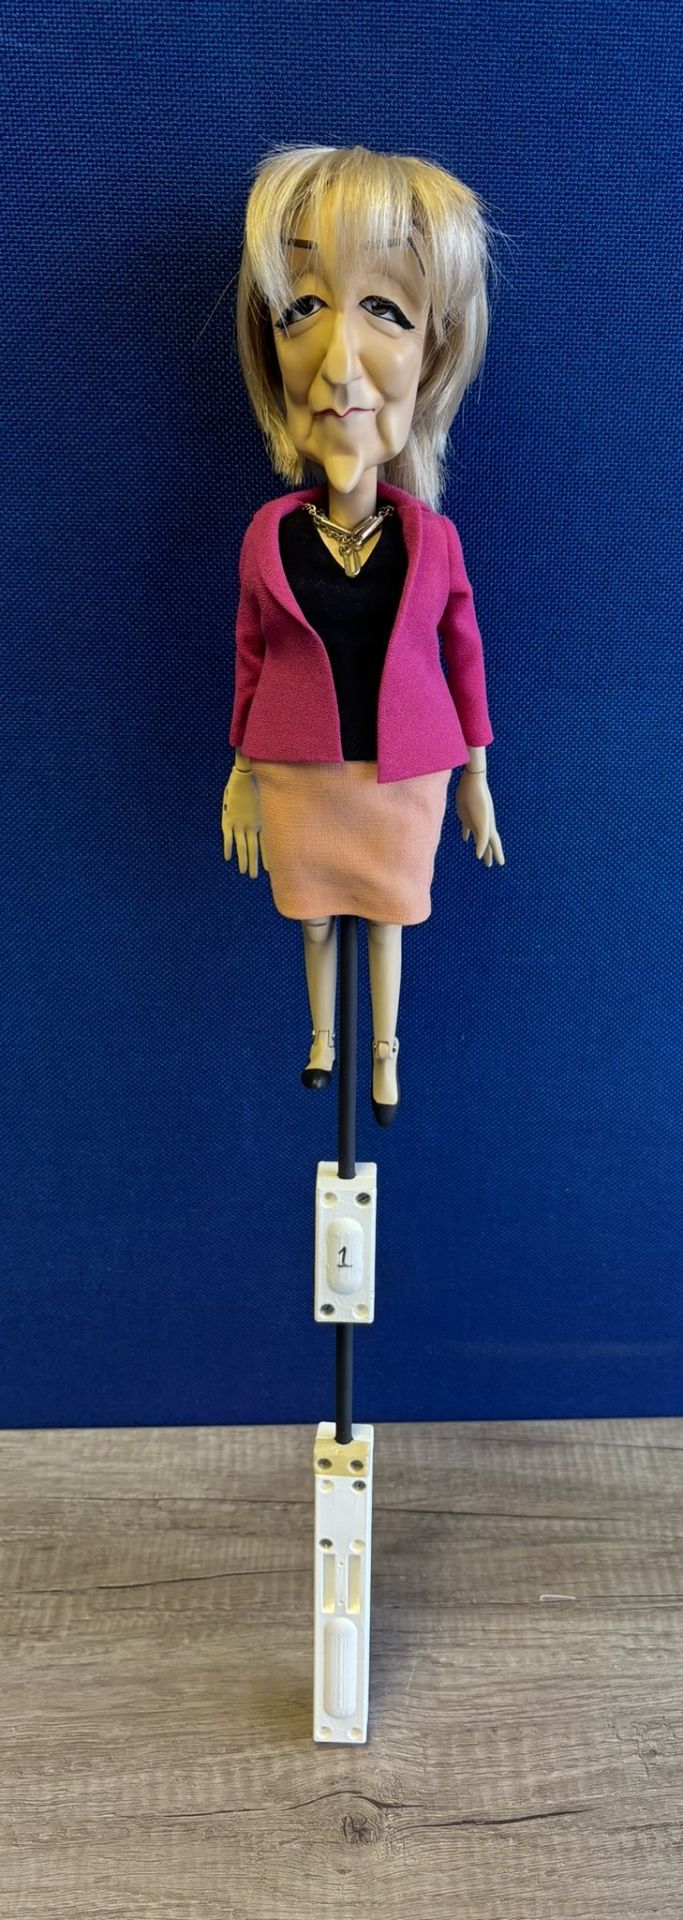 Newzoid puppet - Andrea Leadsom - Image 3 of 3